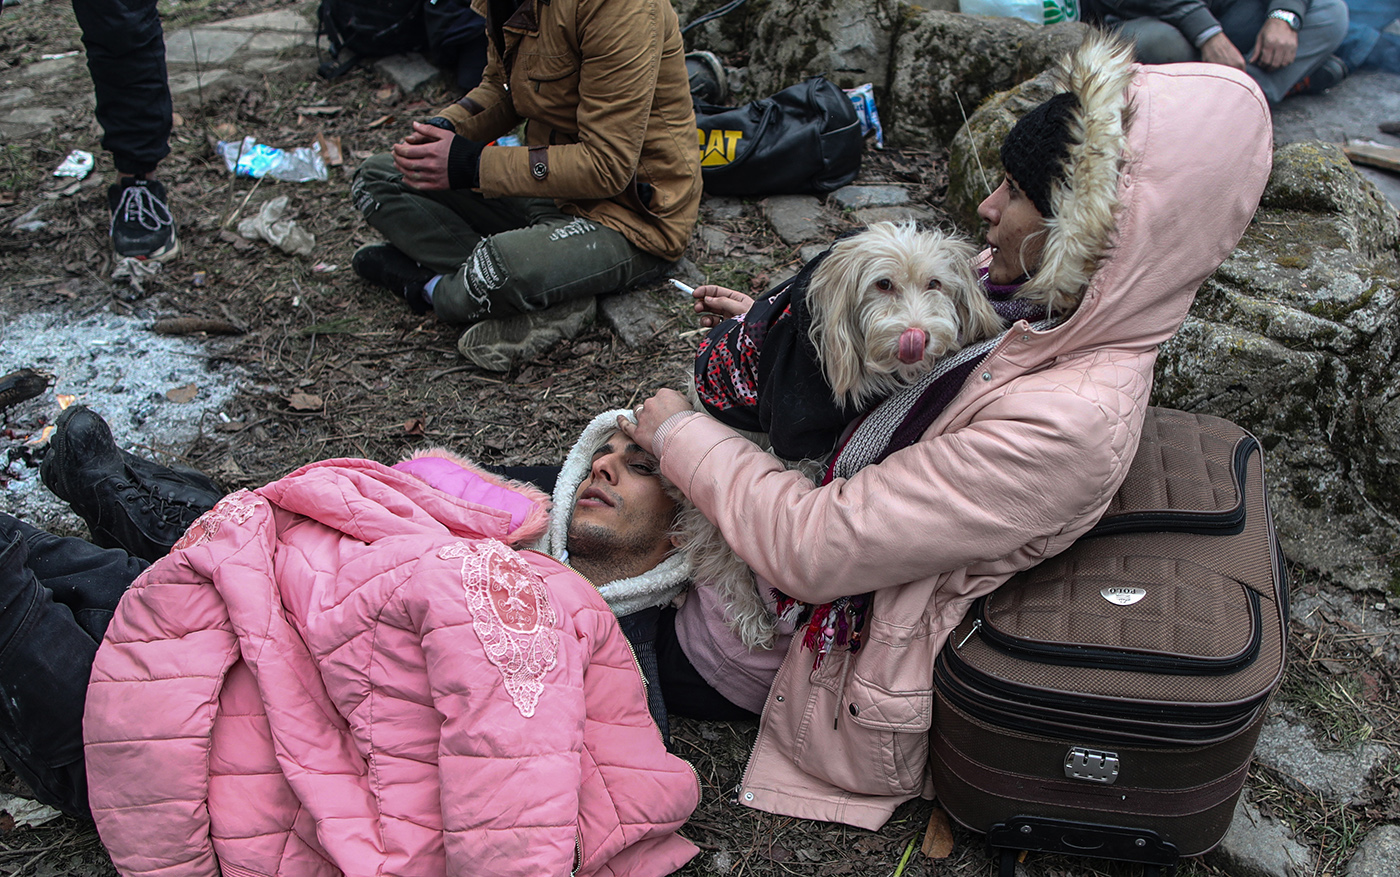 Refugees have some rest before attempting to pass the closed-off Turkish-Greek border and try to enter Europe, Edirne, Turkey, 29 February 2020, while Greek border officials look on from the Greek side.